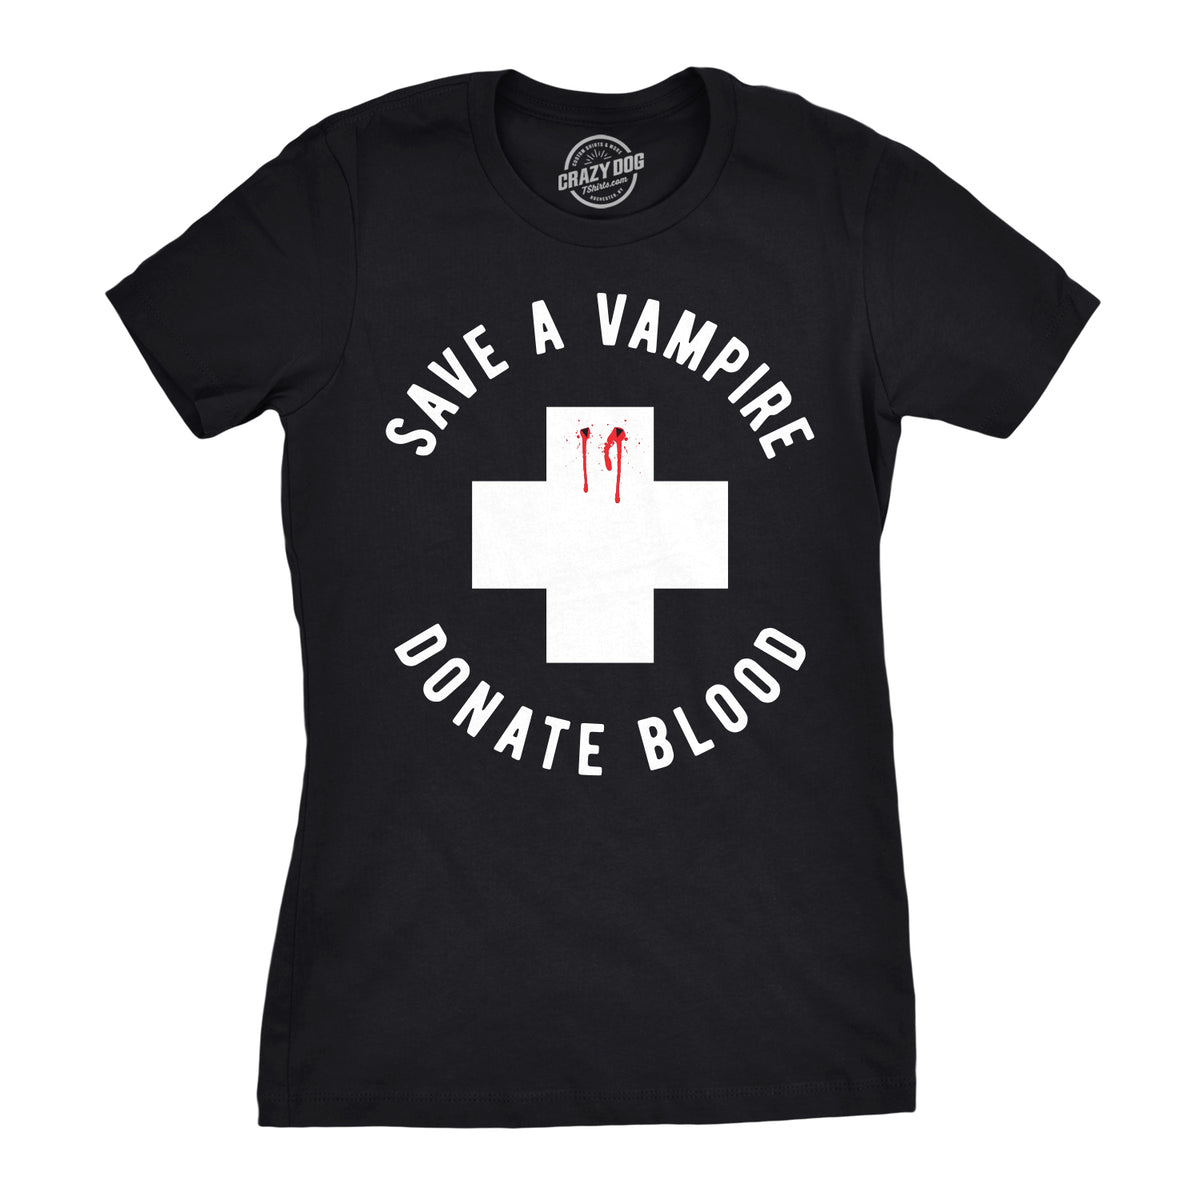 Funny Heather Black - Donate Blood Save A Vampire Donate Blood Womens T Shirt Nerdy Halloween Sarcastic Tee